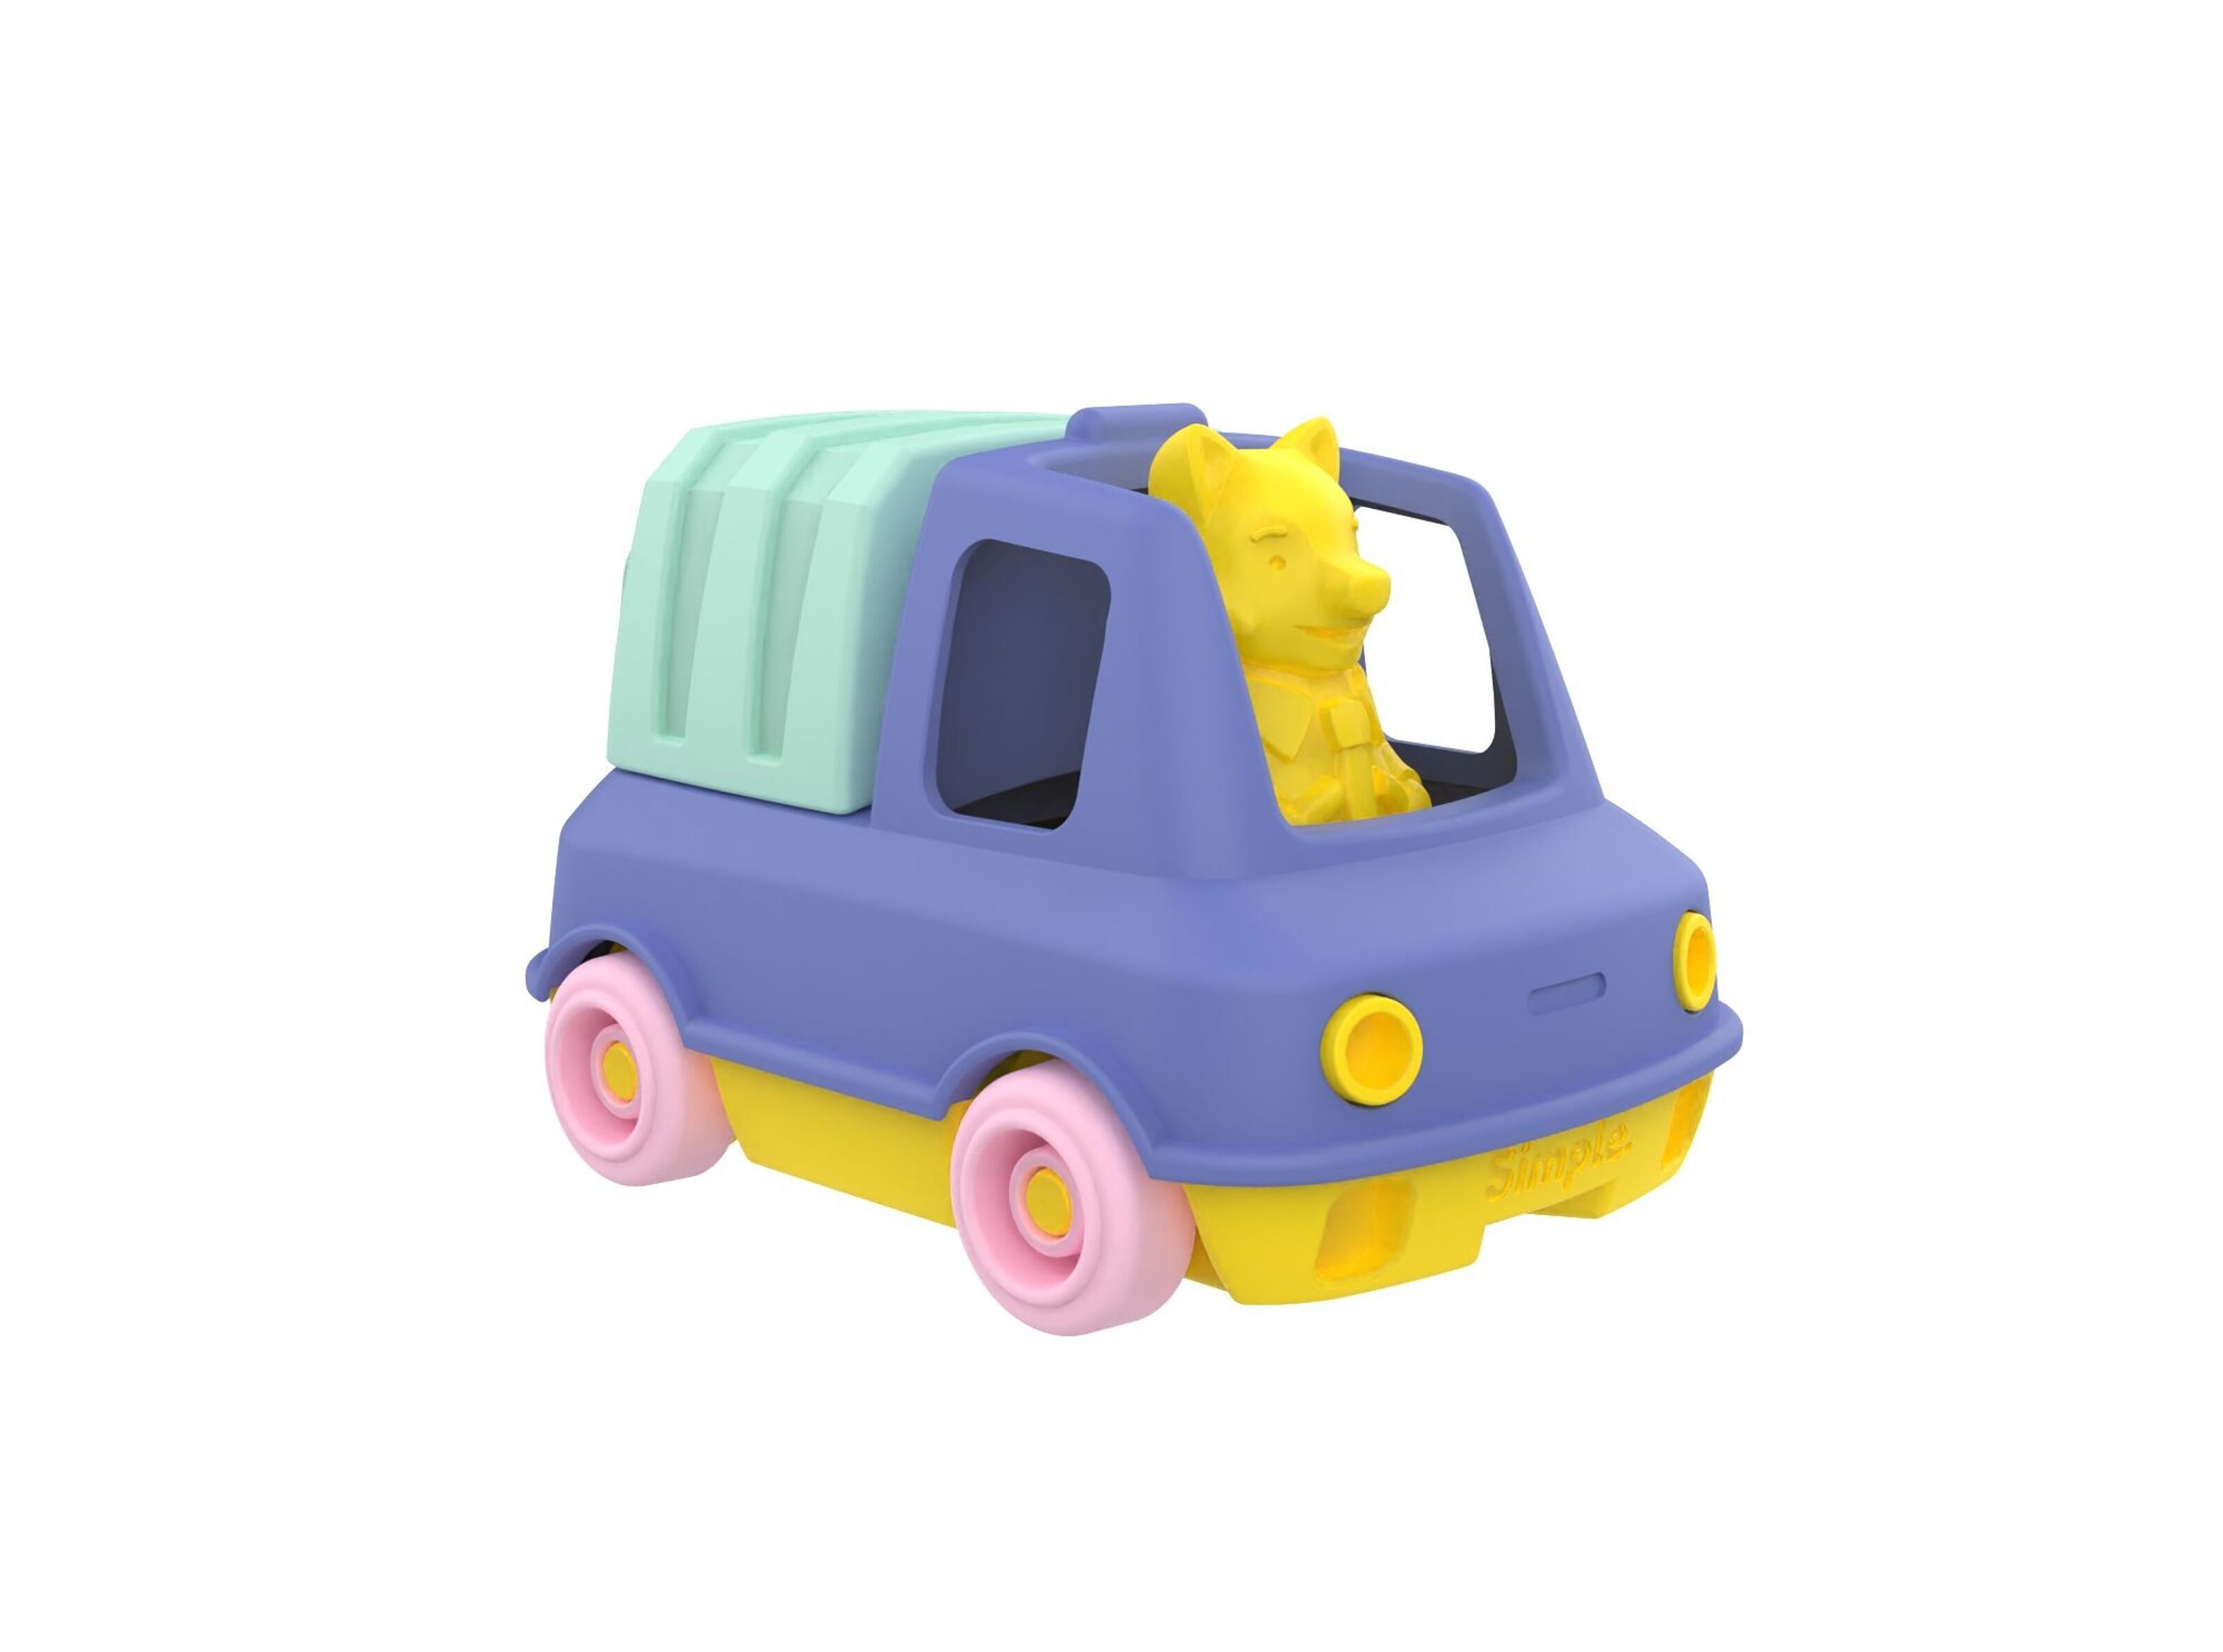 Camion benne Green Toys, Jouets Learning Resources